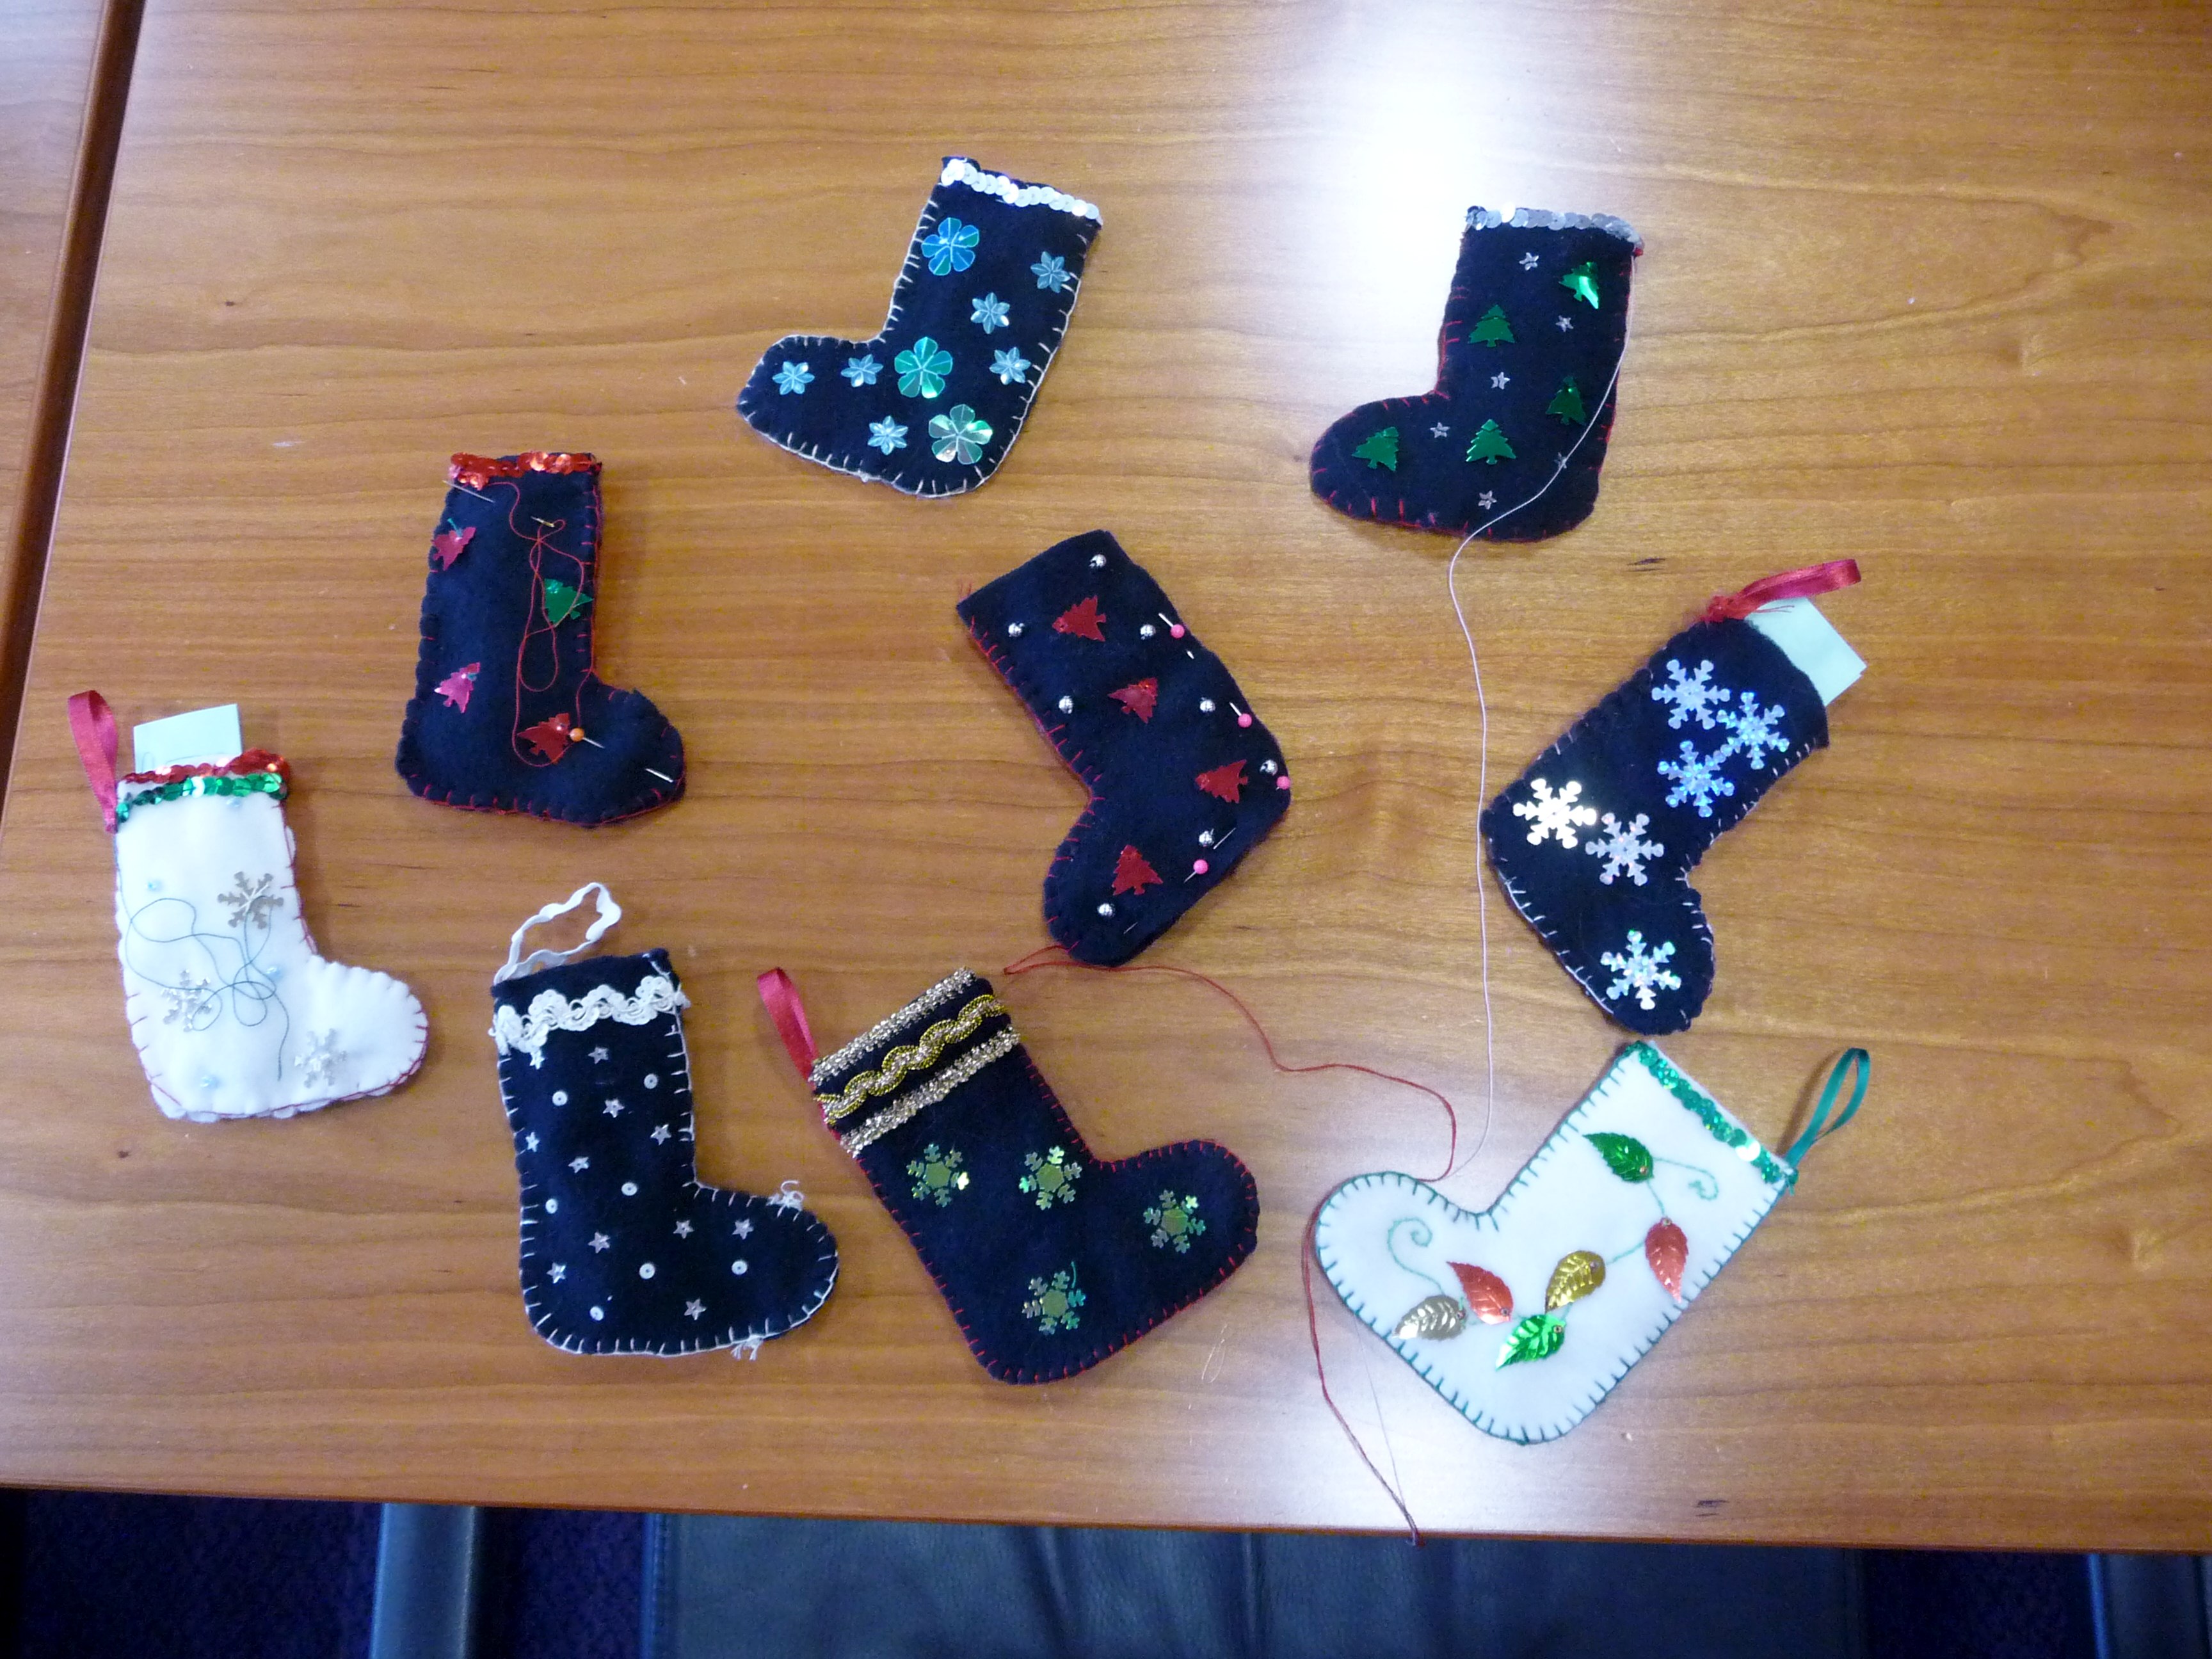 this is the other side of the collection of needle-felted Christmas stockings made by Merseyside YE